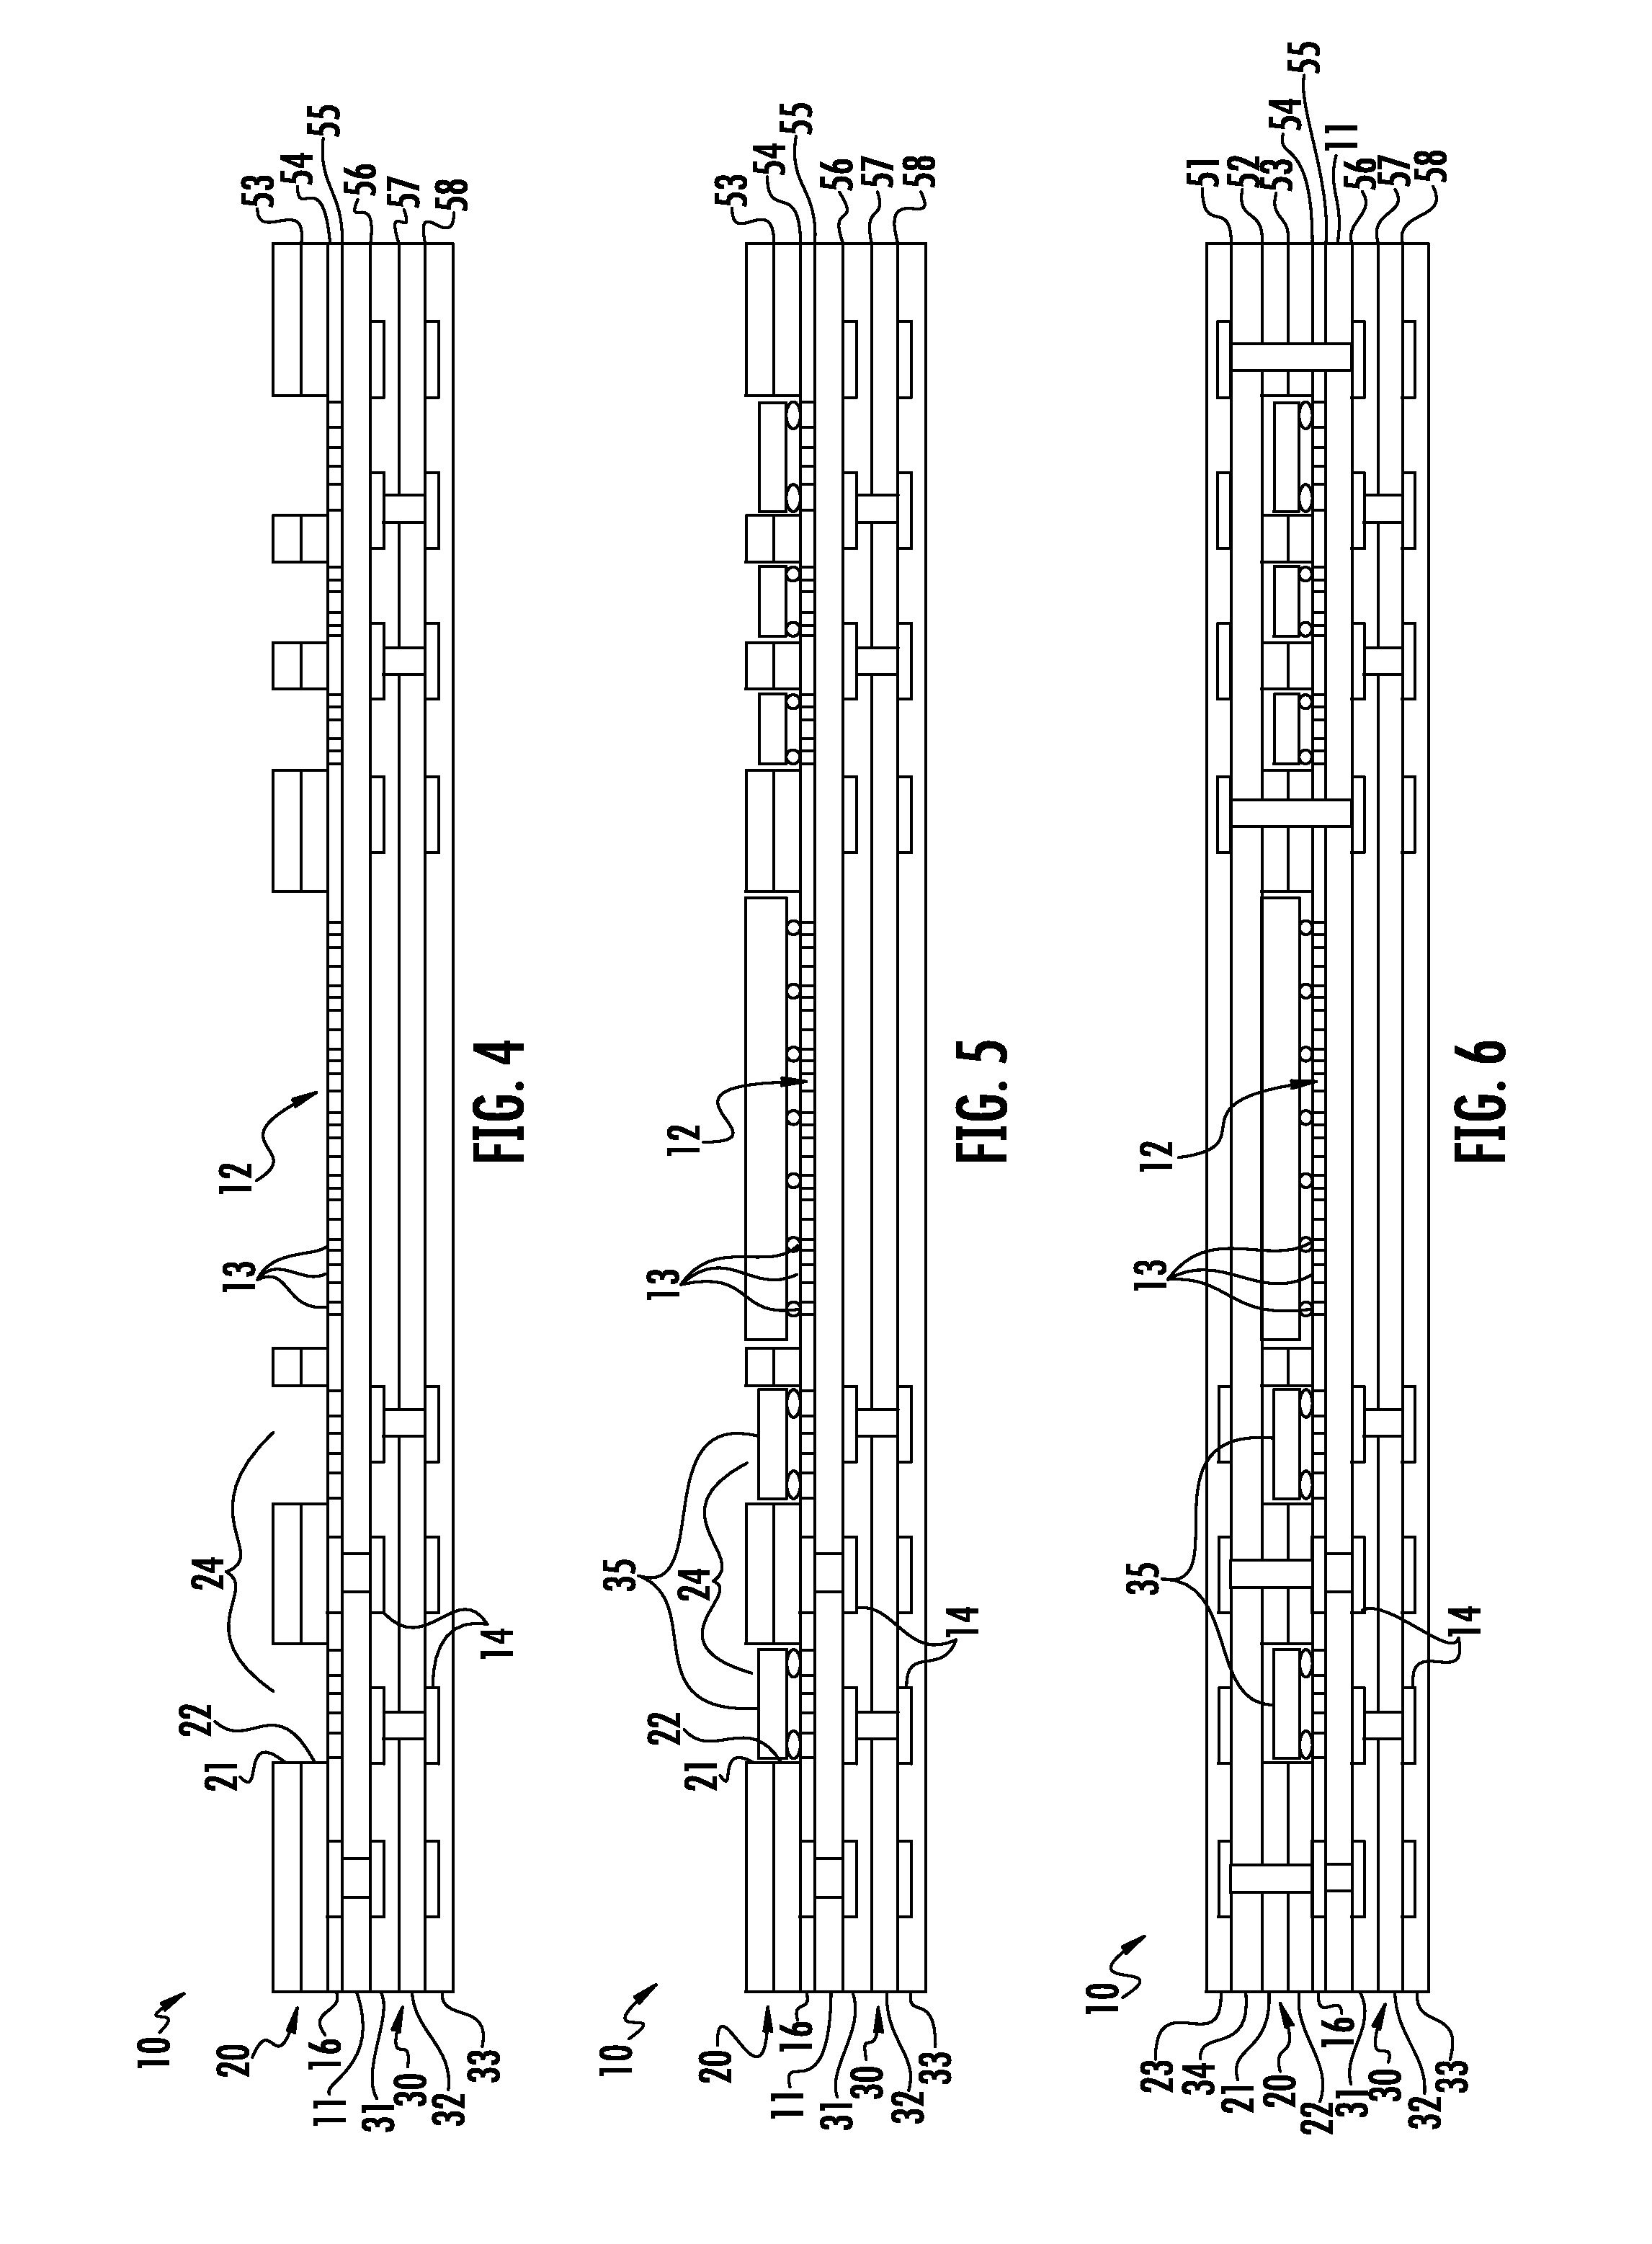 Electronic device having liquid crystal polymer solder mask and outer sealing layers, and associated methods